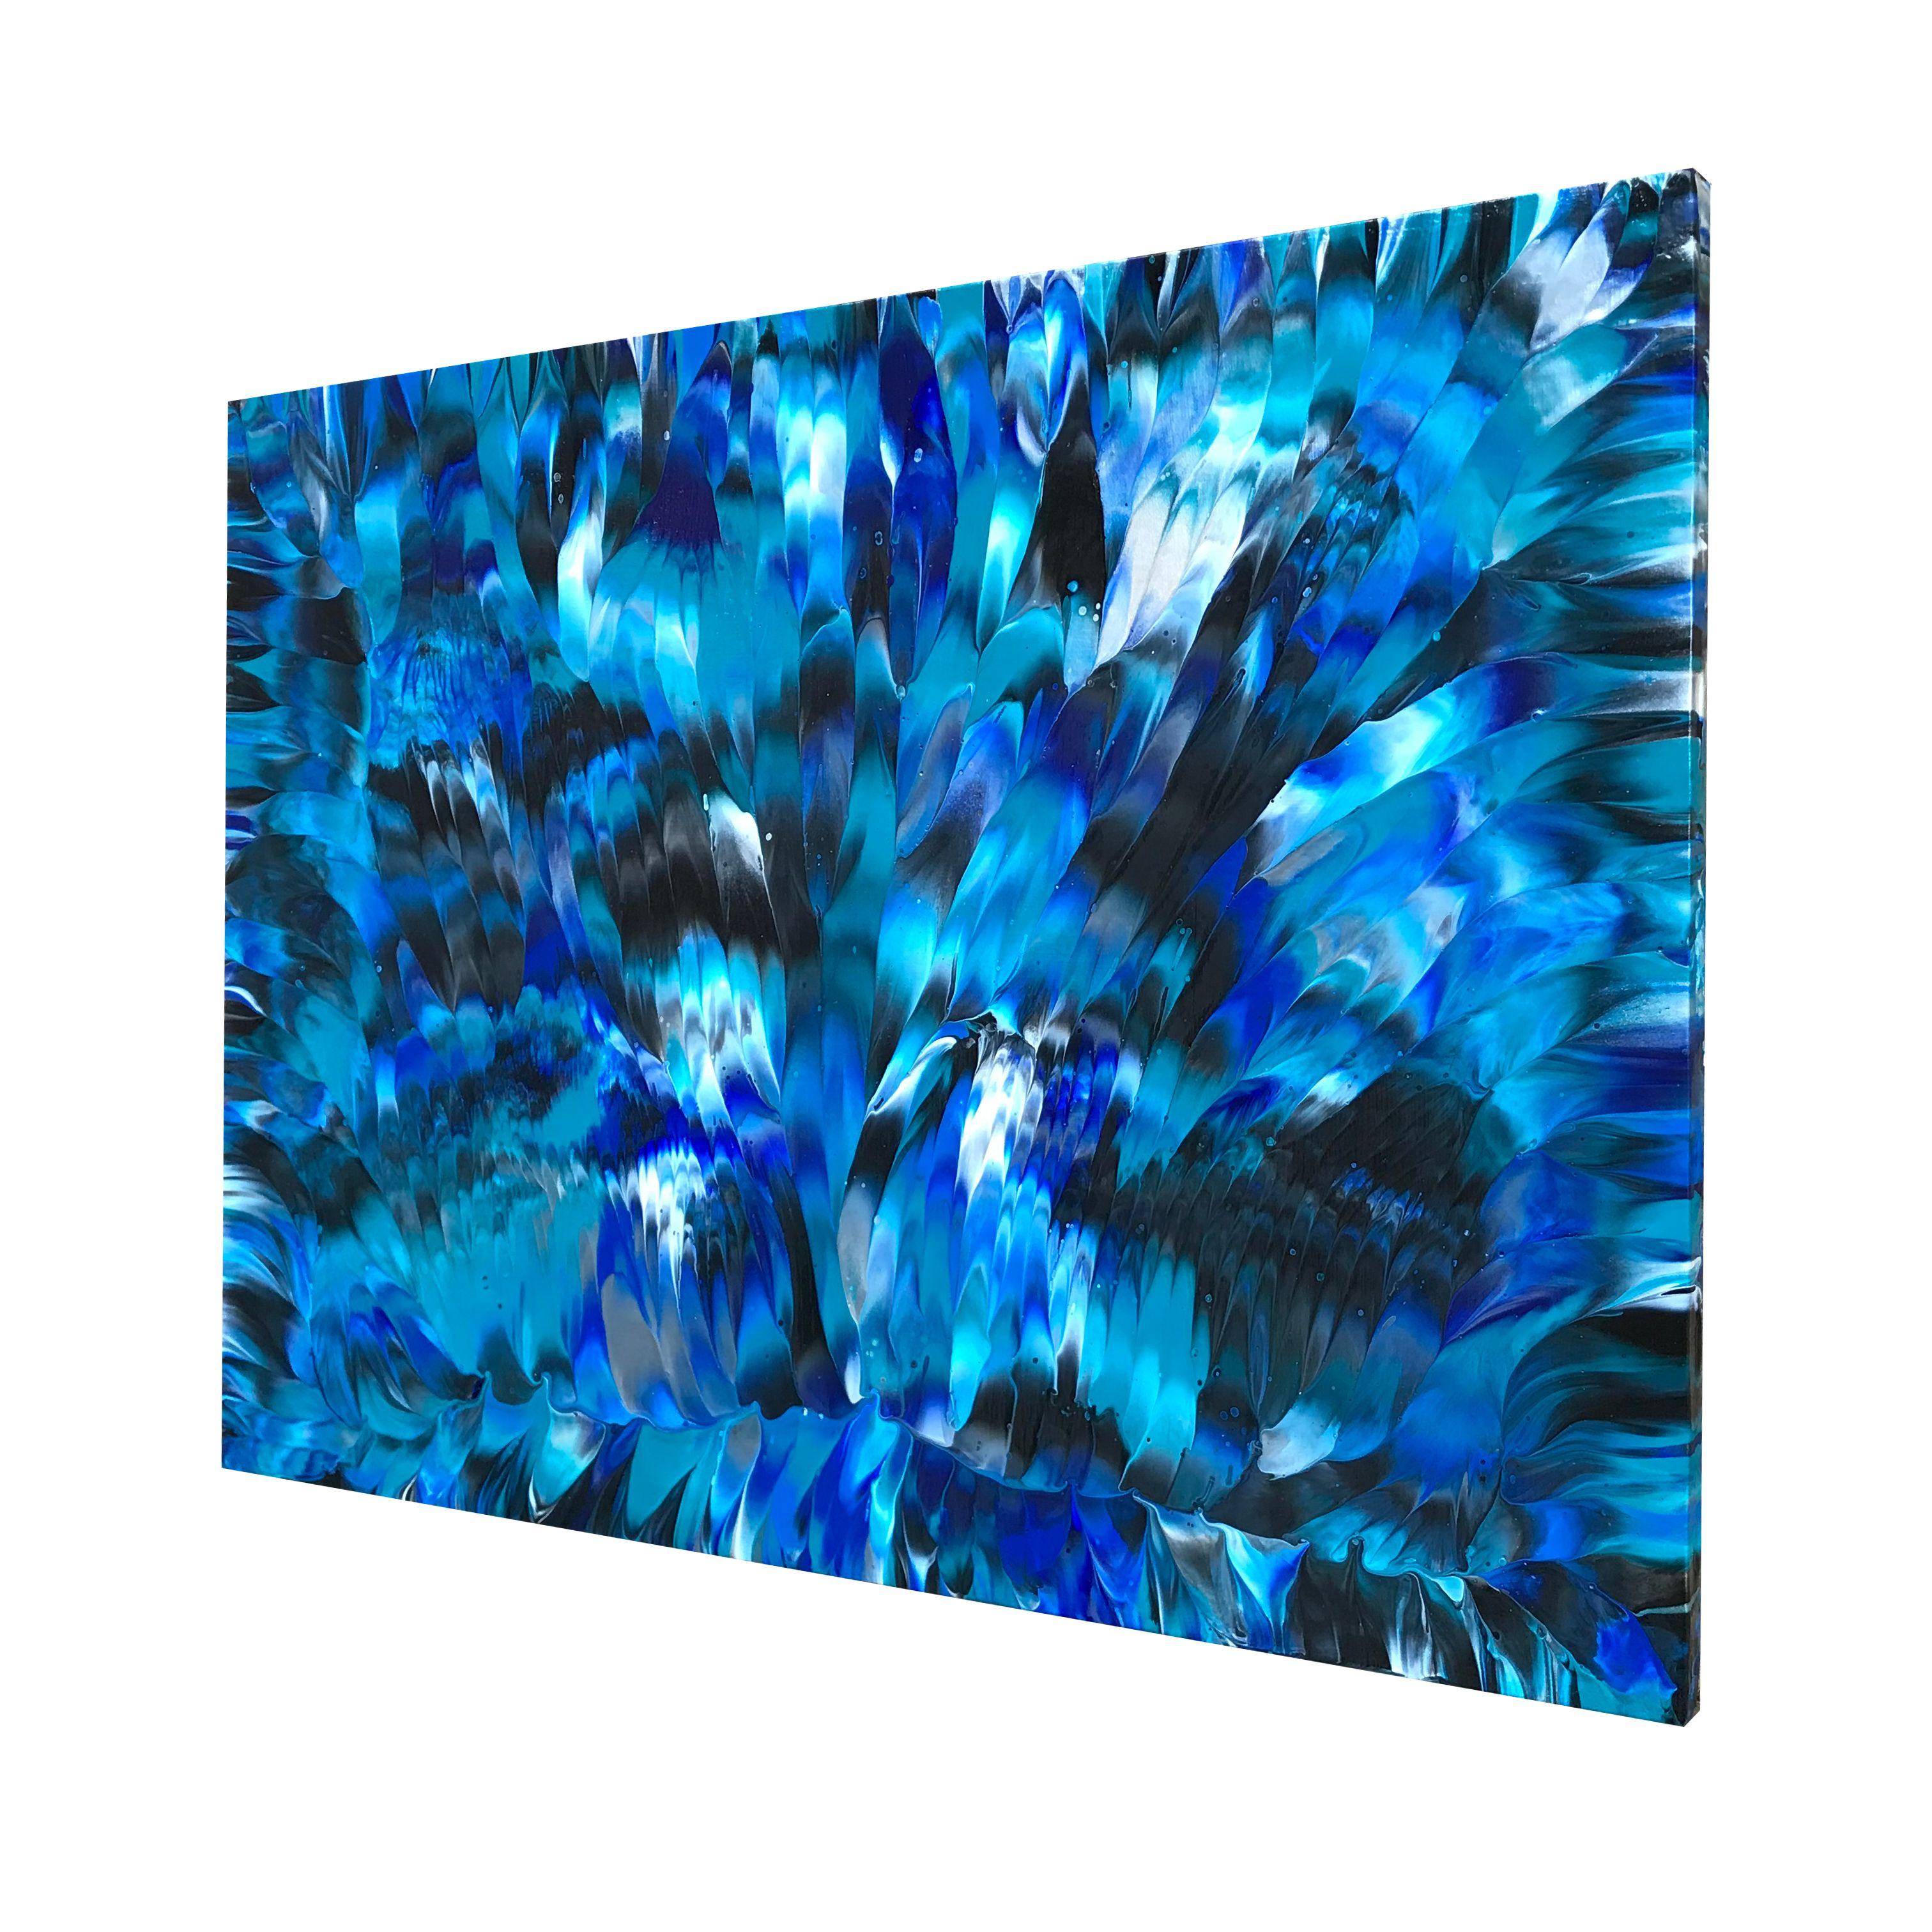 Sub-Zero is an original, spontaneous, abstract expressionism action painting with fierce brush stroke lines and movement resembling blue jay feathers or any Canadian birds that bear the sub-zero temperatures in the Winter. This painting features